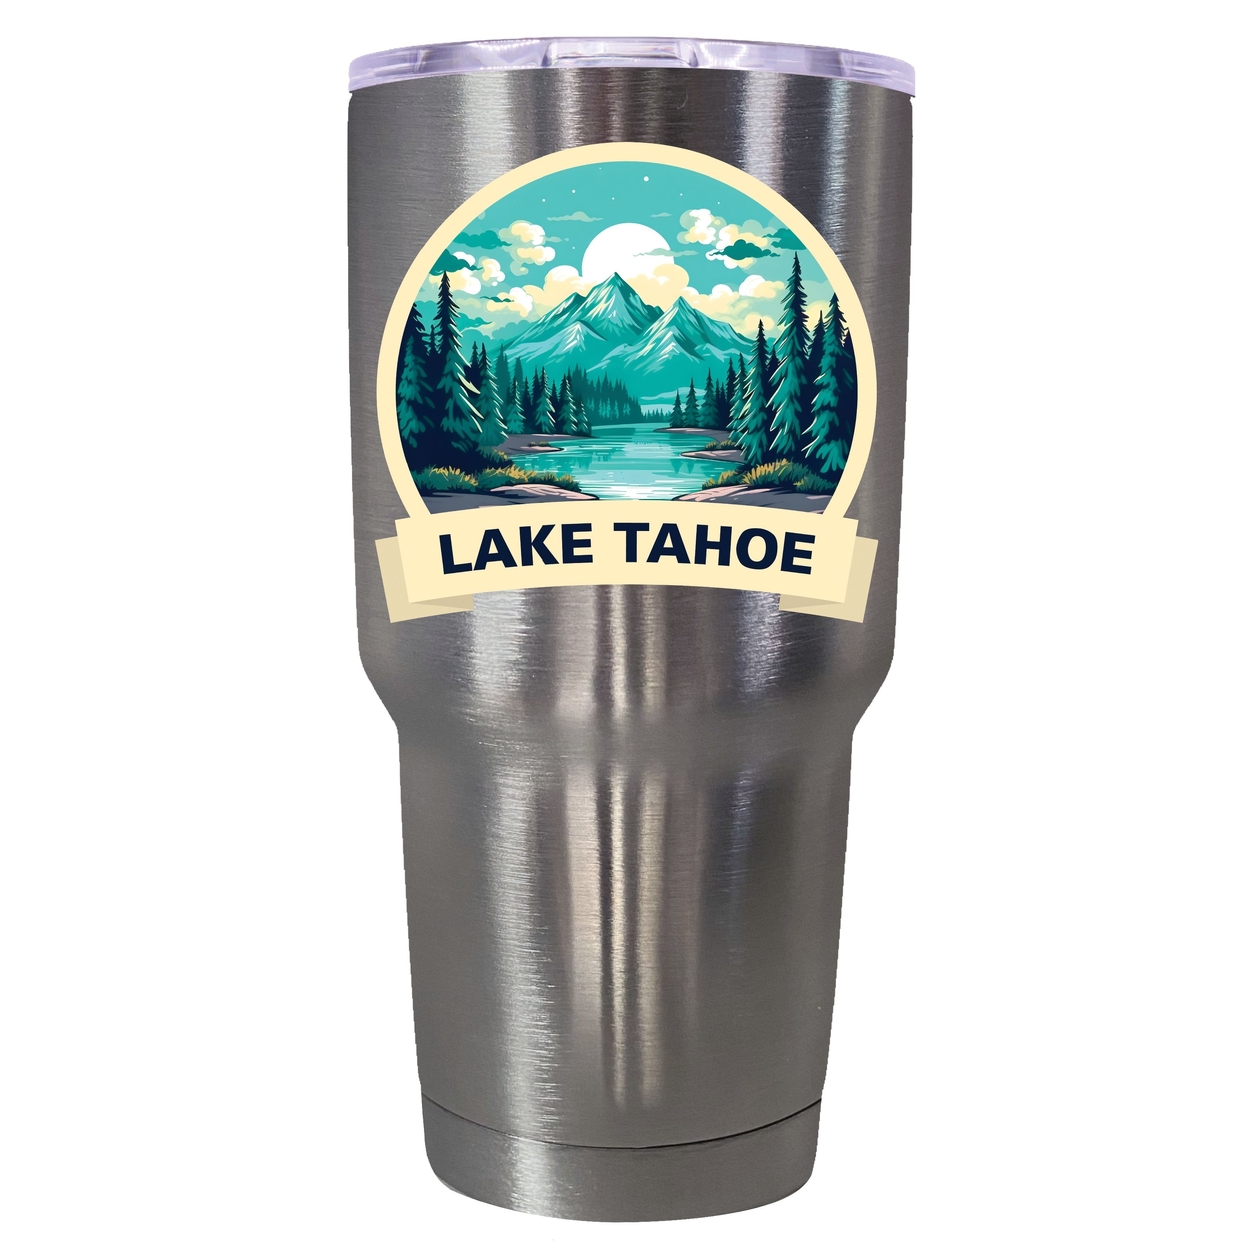 Lake Tahoe California Souvenir 24 Oz Insulated Stainless Steel Tumbler - Rose Gold,,4-Pack